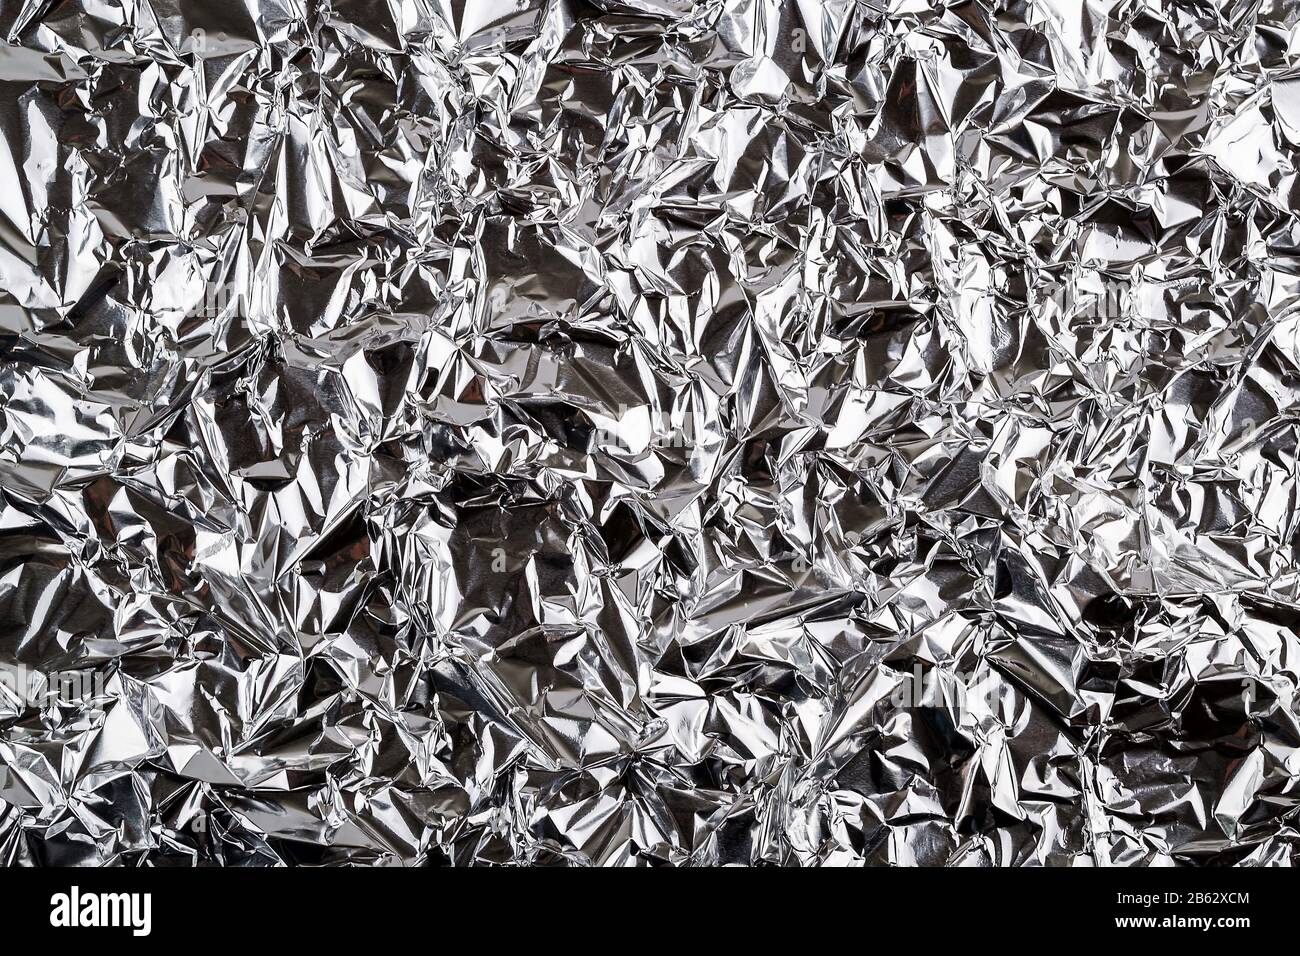 Crumpled aluminum foil texture. Sheet of creased silver foil with shiny folds for background. Metal wrinkled surface as graphic resource. Top view. Stock Photo